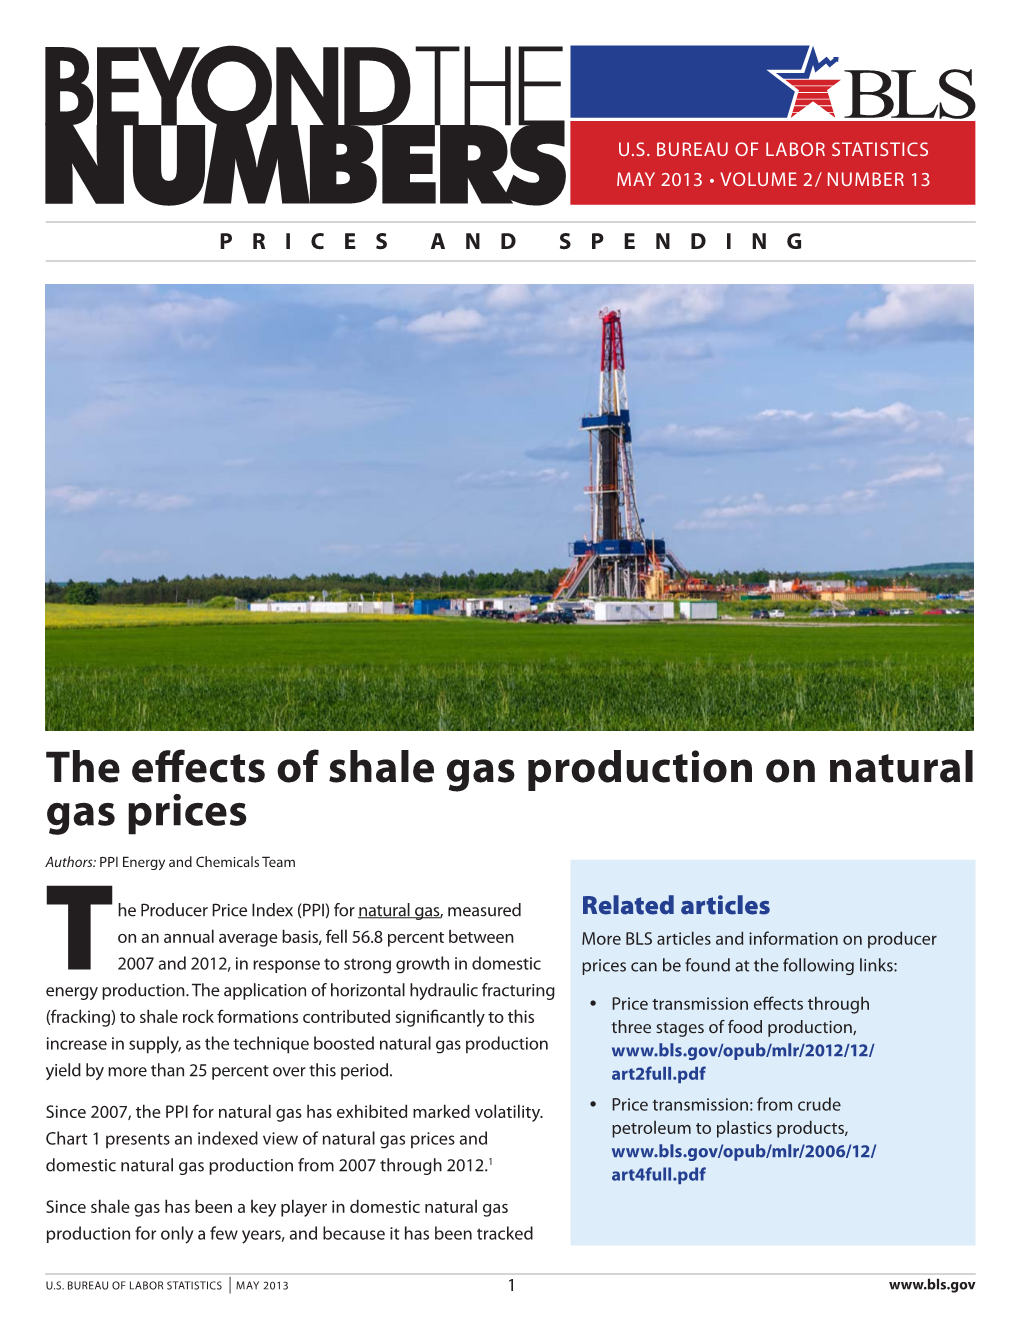 The Effects of Shale Gas Production on Natural Gas Prices